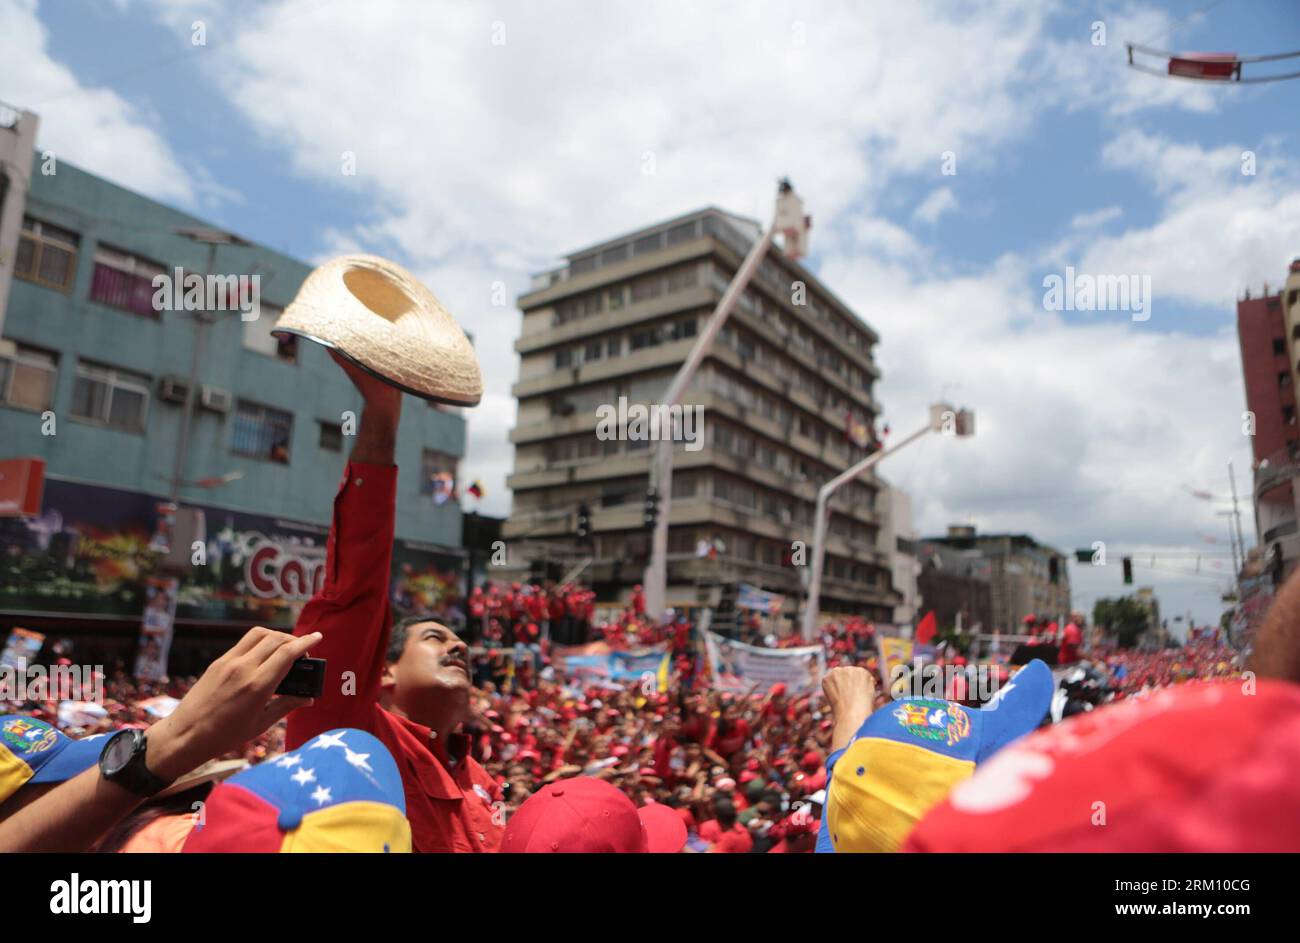 Bildnummer: 59486117  Datum: 08.04.2013  Copyright: imago/Xinhua MATURIN, April, 2013 - Image provided by Hugo Chavez Campaign Command shows Venezuelan Acting President and presidential candidate Nicolas Maduro attending a campaign in Maturin, Monagas State, Venezuela, on April 8, 2013. Venezuela will held presidential elections on April 14. (Xinhua/Hugo Chavez Campaign Command) (da) VENEZUELA-POLITICS-ELECTIONS PUBLICATIONxNOTxINxCHN People Politik xcb x0x 2013 quer     59486117 Date 08 04 2013 Copyright Imago XINHUA Maturin April 2013 Image provided by Hugo Chavez Campaign Command Shows Vene Stock Photo